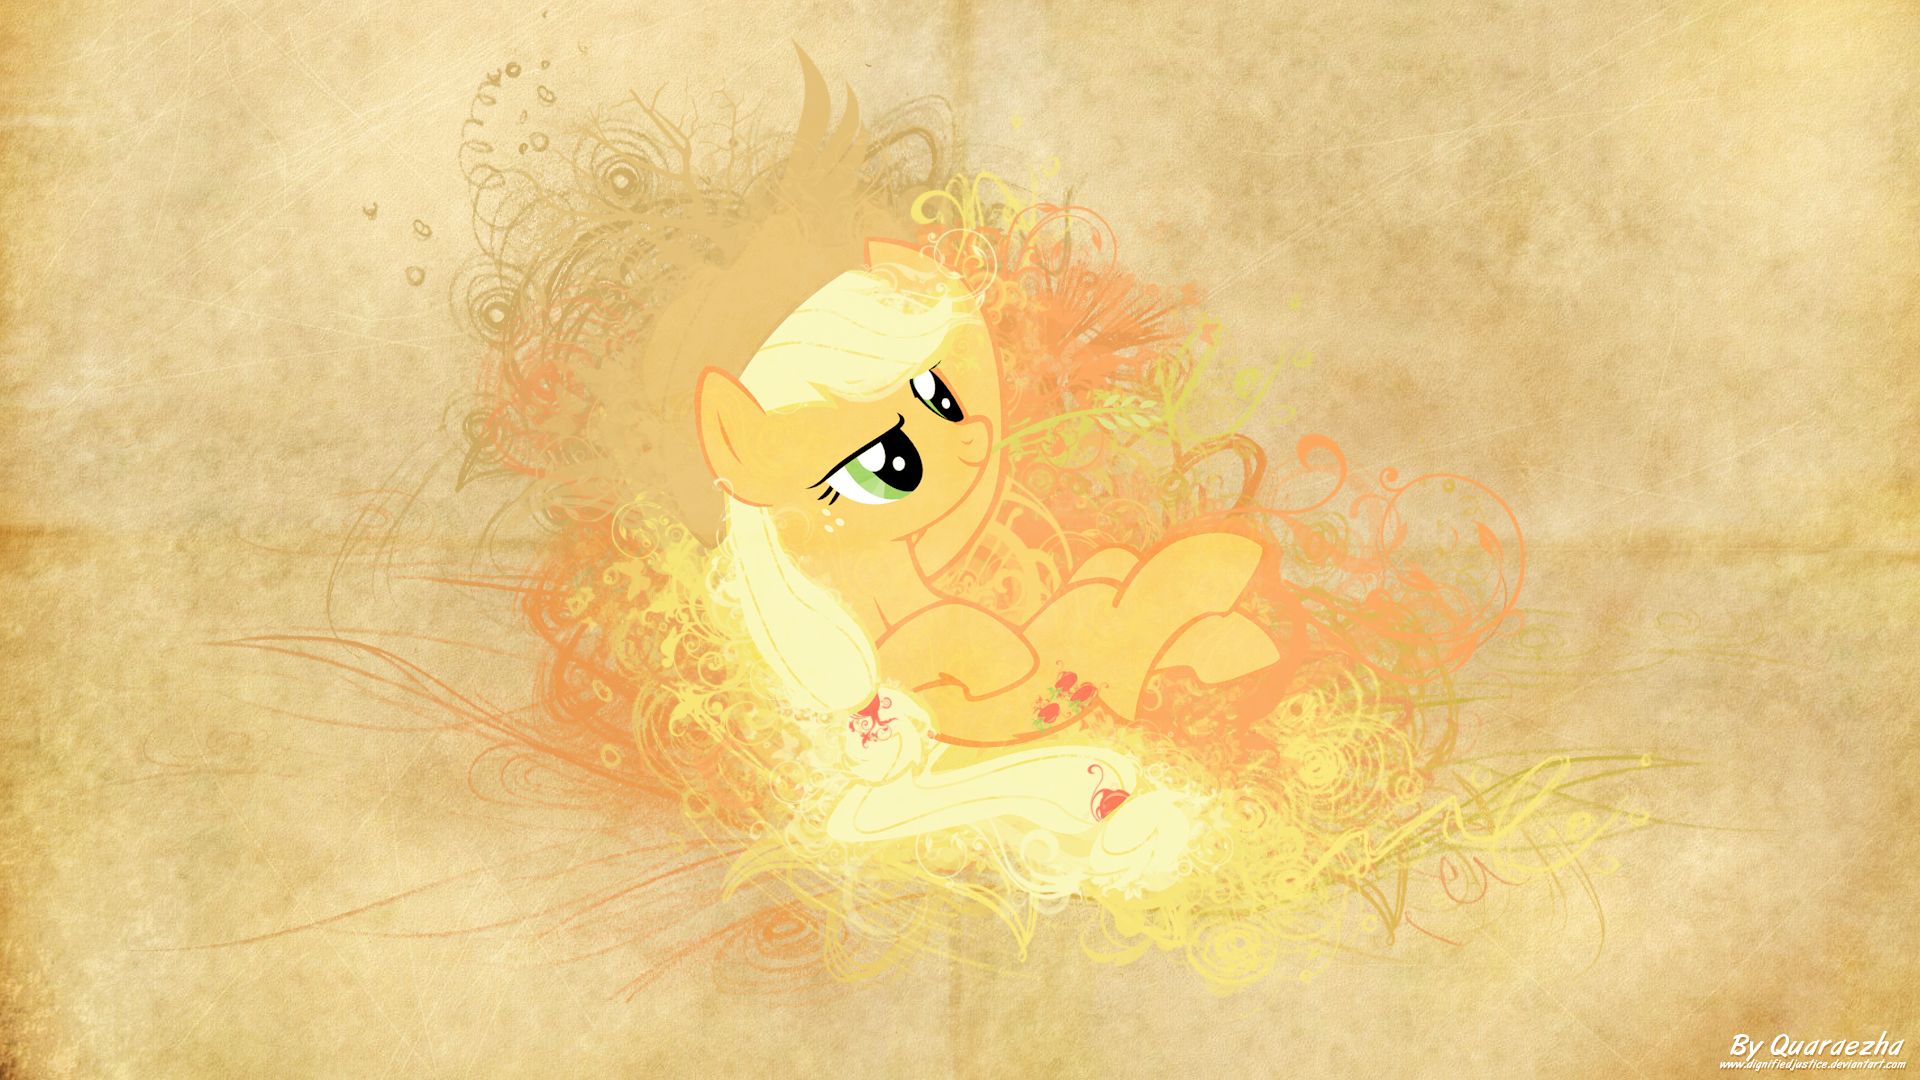 tv show, my little pony: friendship is magic, applejack (my little pony), colors, magic, my little pony, vector